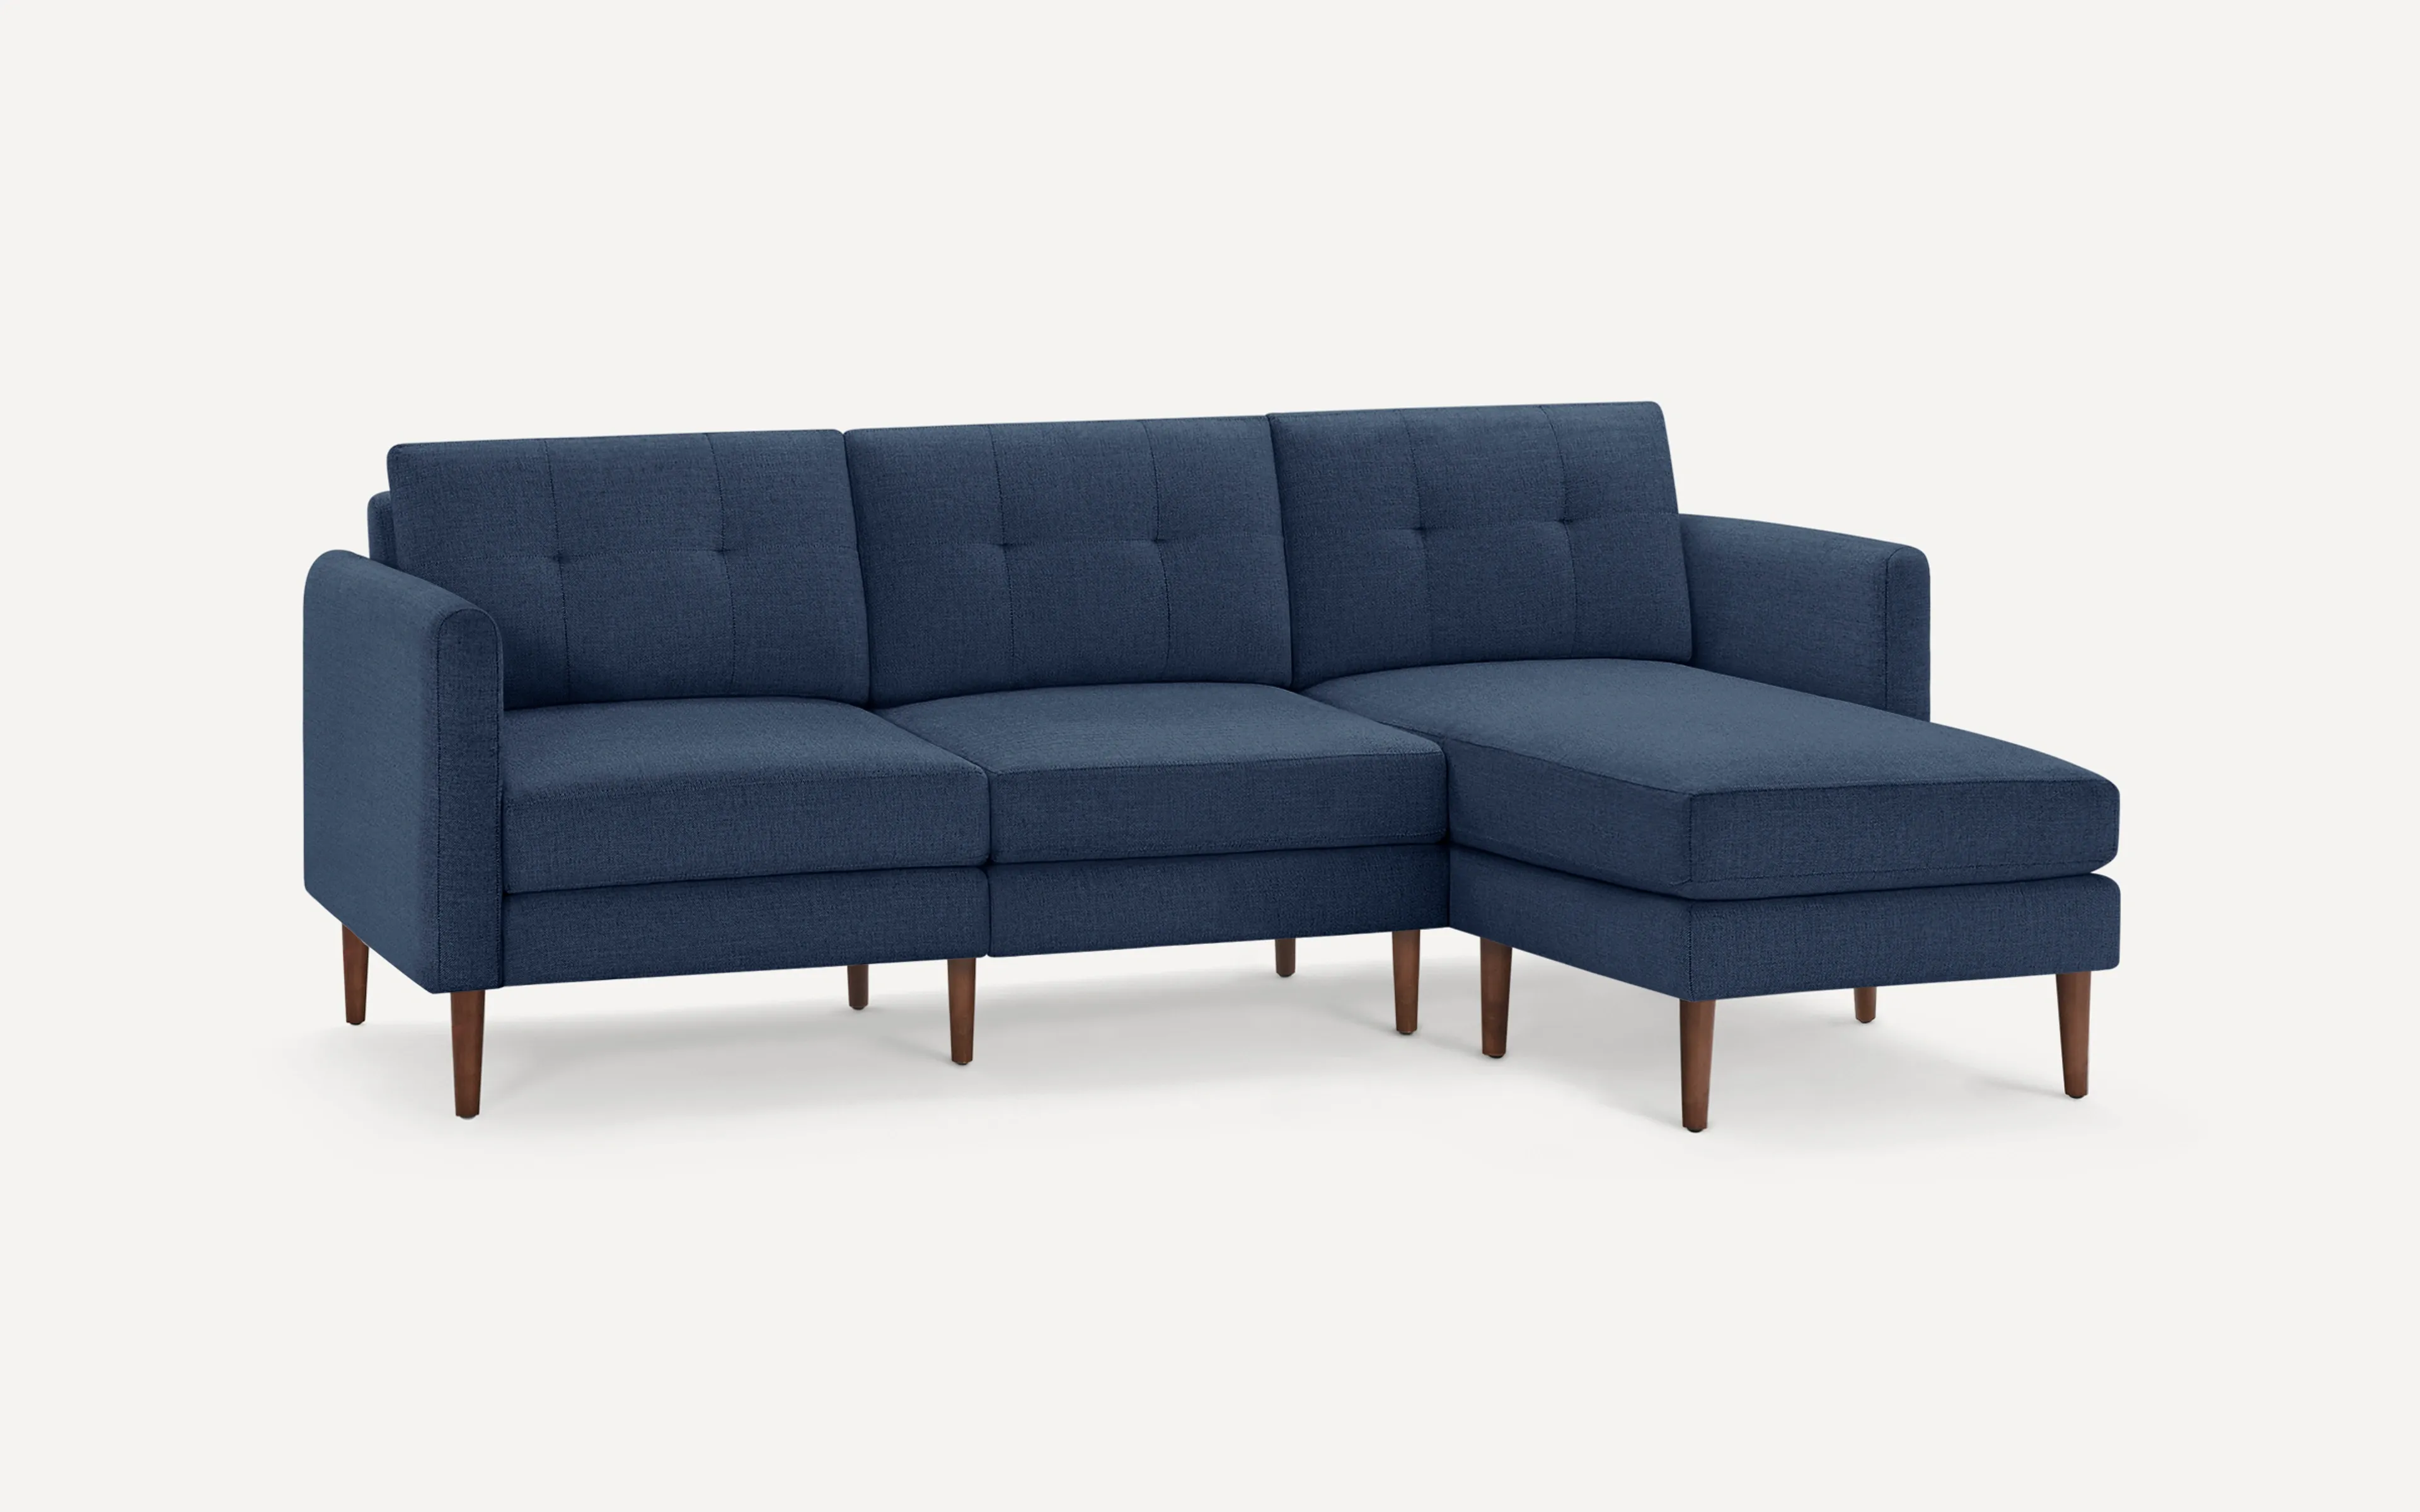 Original Nomad Chaise Sofa in Navy Blue Fabric